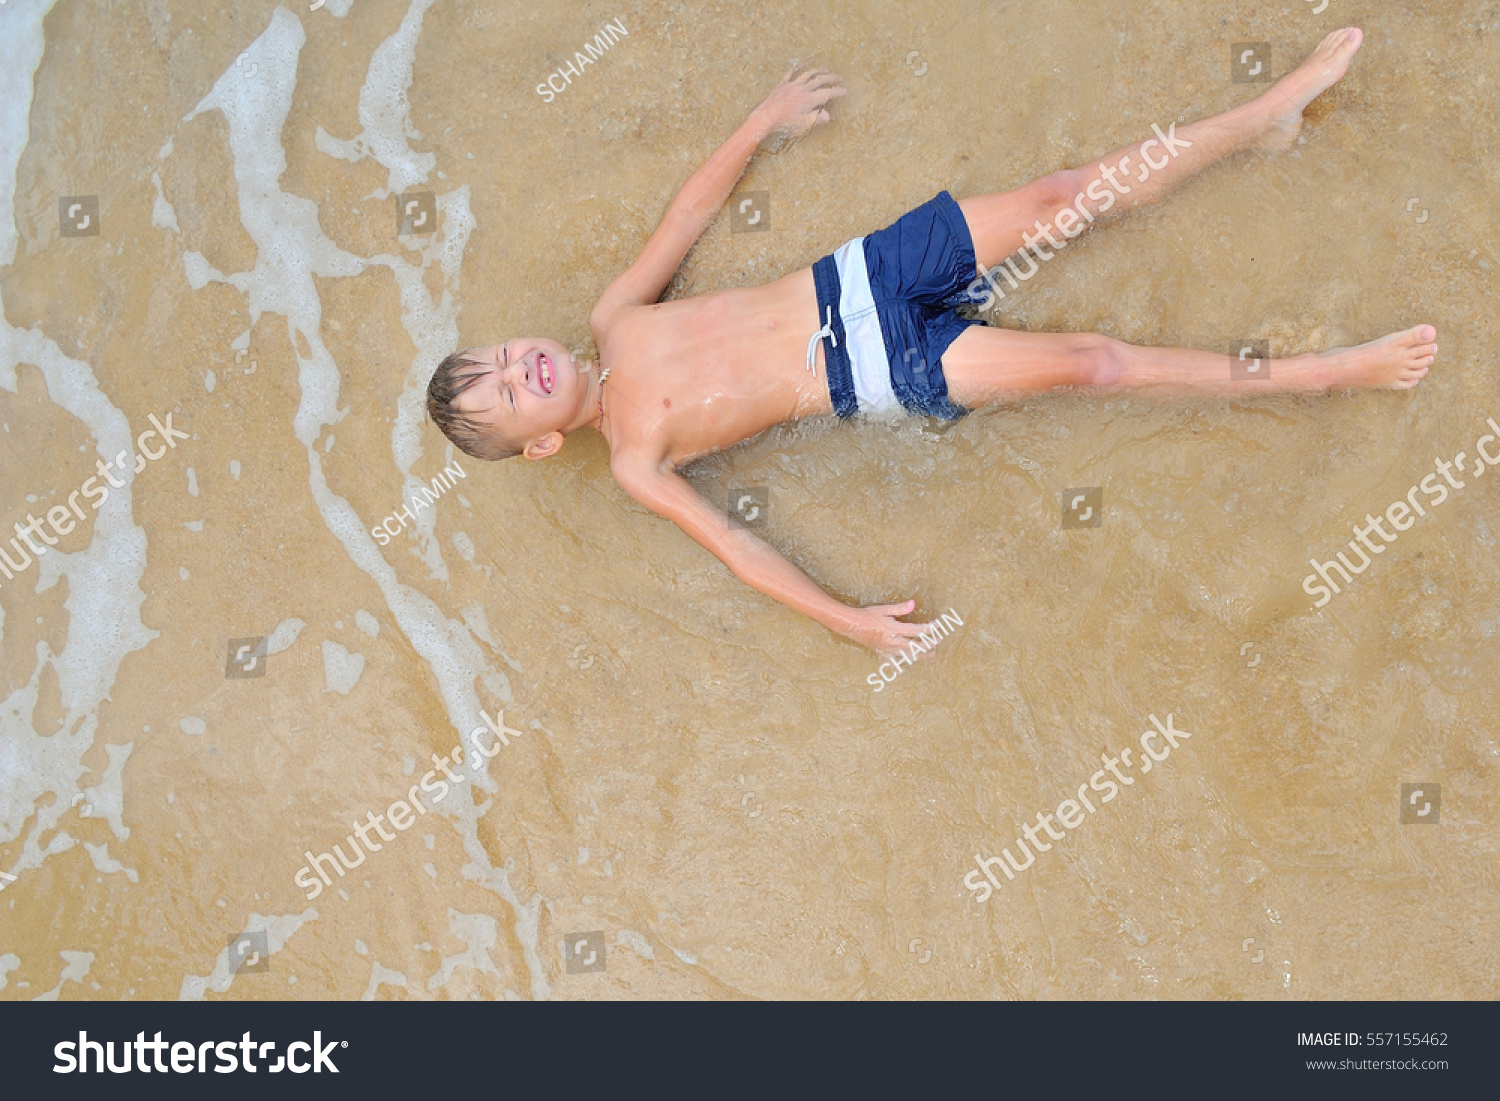 Eight years old handsome blond boy lying on the sand, eyes shut, attracted waves rolls and cover him as if coverlet, view from above #557155462